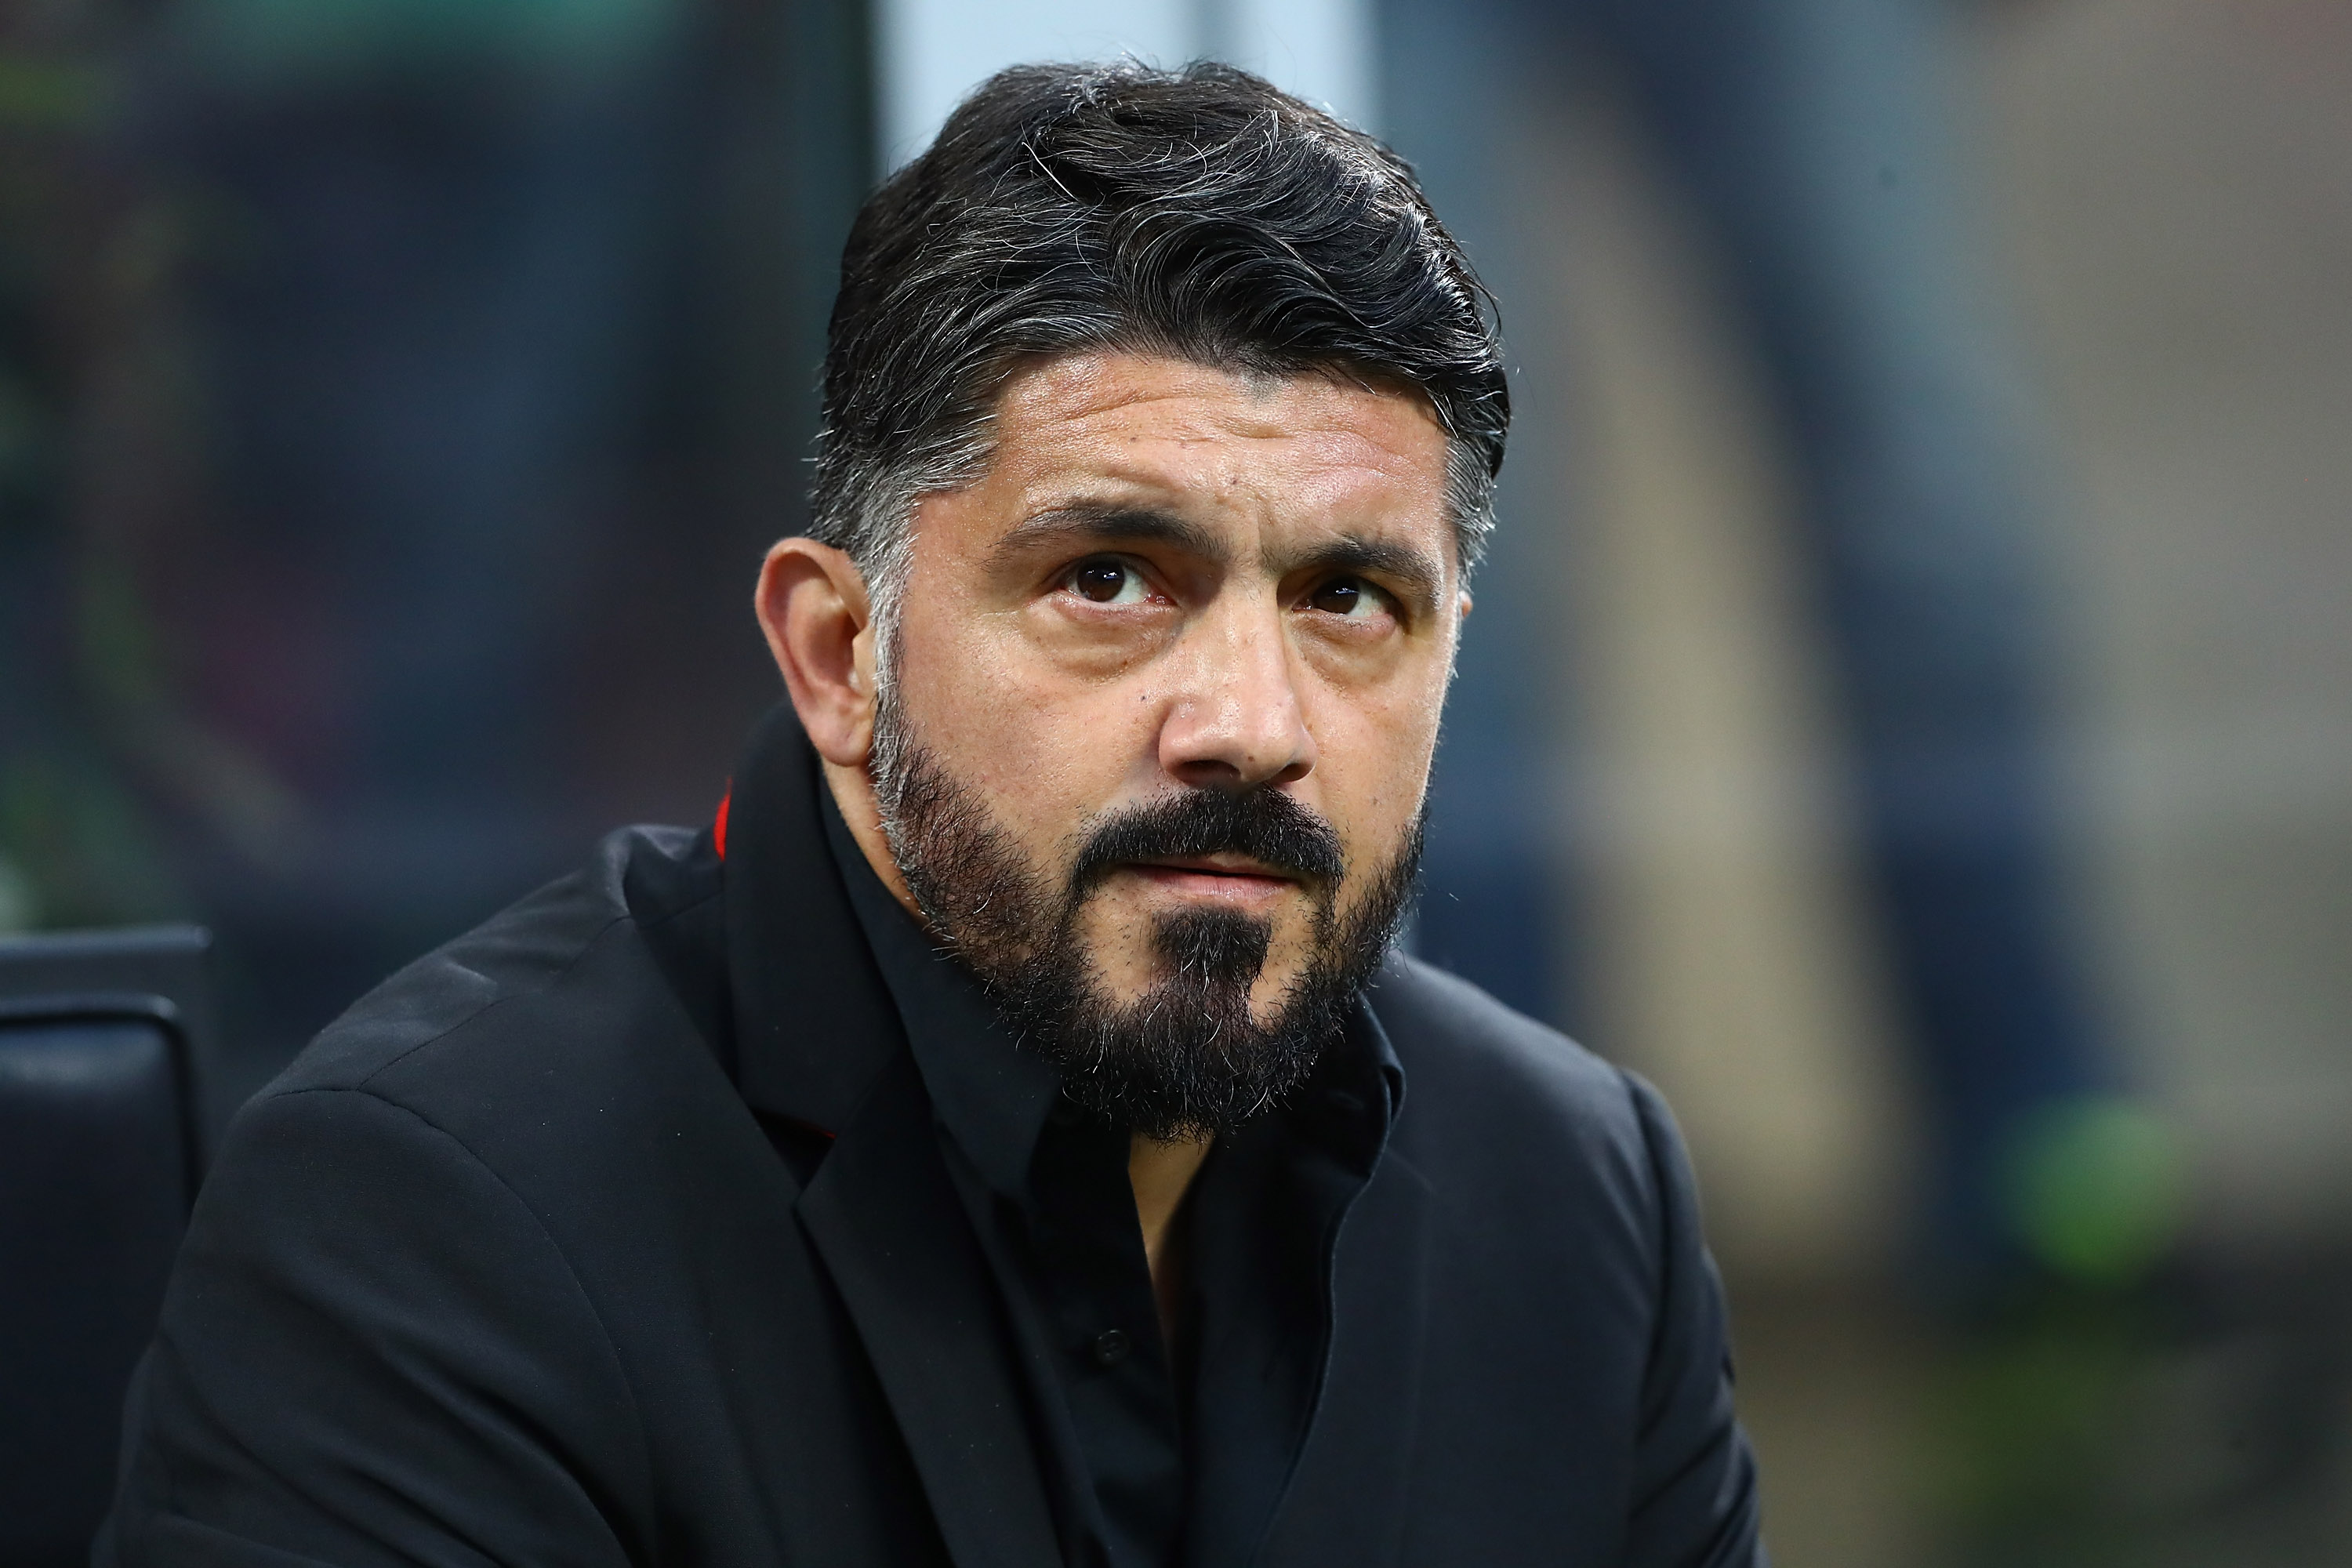 MILAN, ITALY - MAY 06: AC Milan coach Gennaro Gattuso looks on before the Serie A match between AC Milan and Bologna FC at Stadio Giuseppe Meazza on May 6, 2019 in Milan, Italy. (Photo by Marco Luzzani/Getty Images)